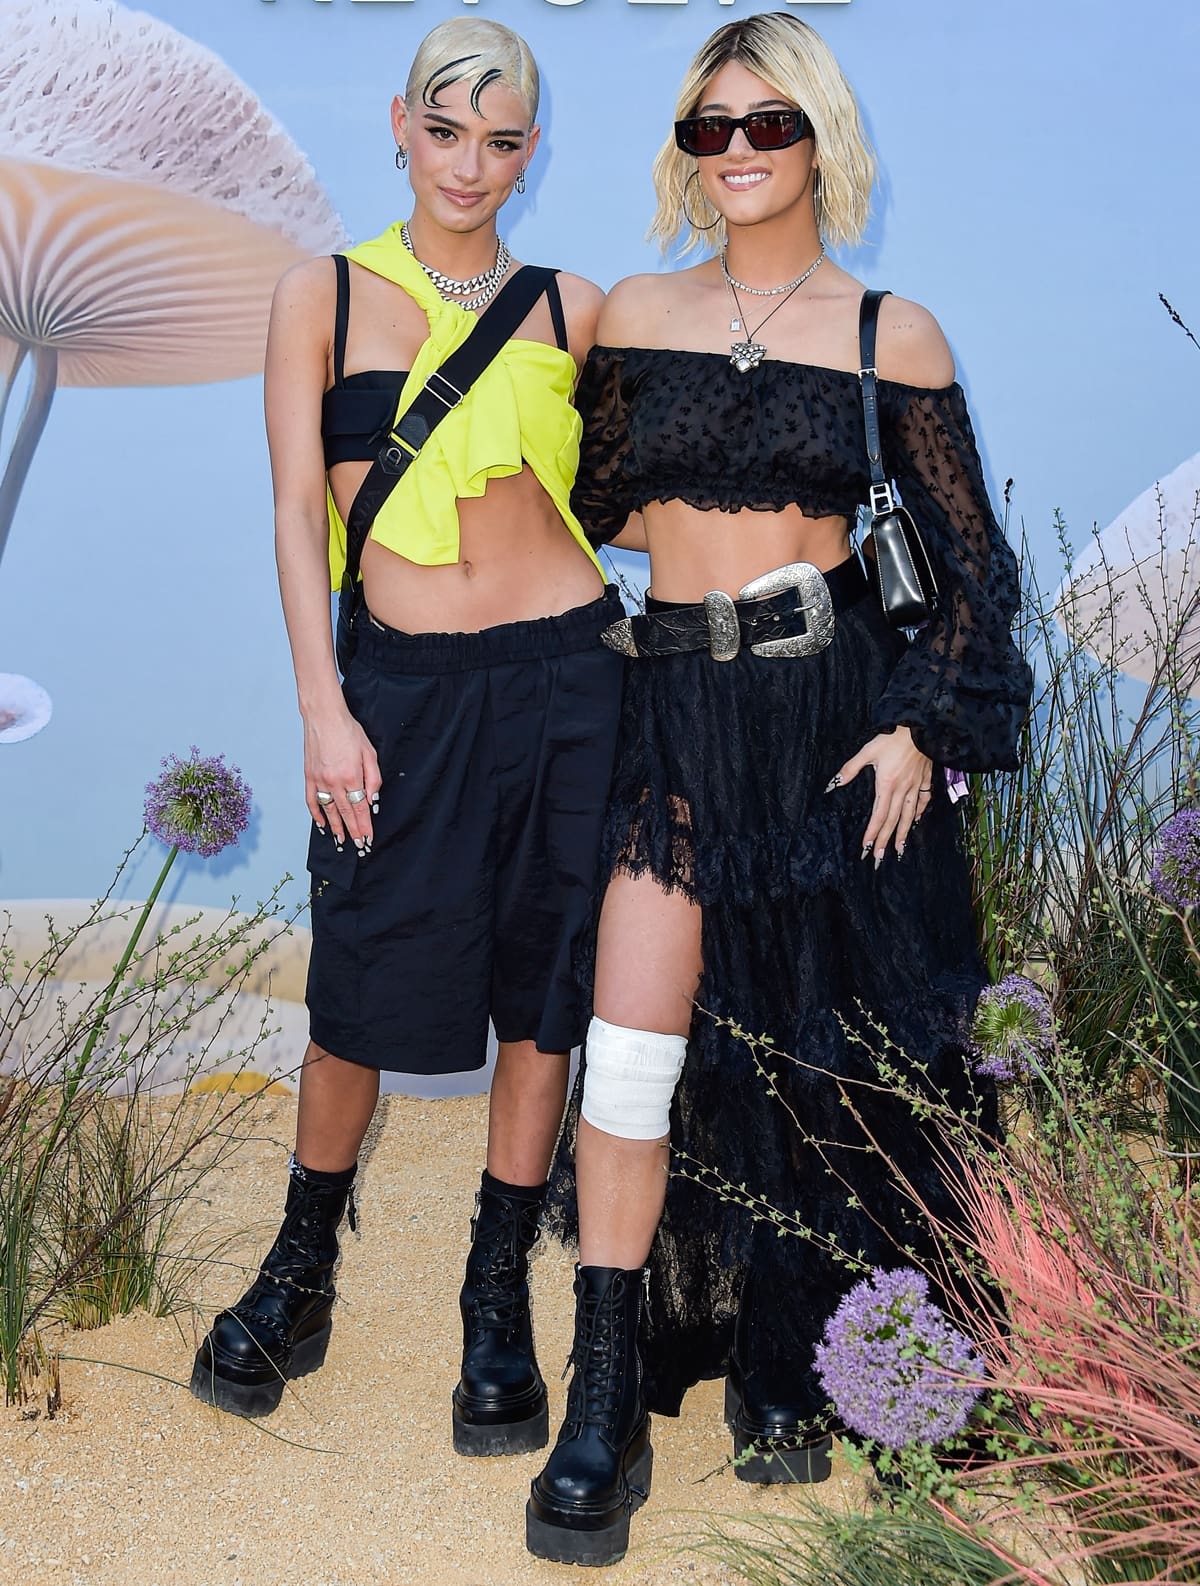 Dixie D'Amelio added a burst of color to her outfit while Charli D'Amelio embraced a darker bohemian style at the 2023 REVOLVE Festival